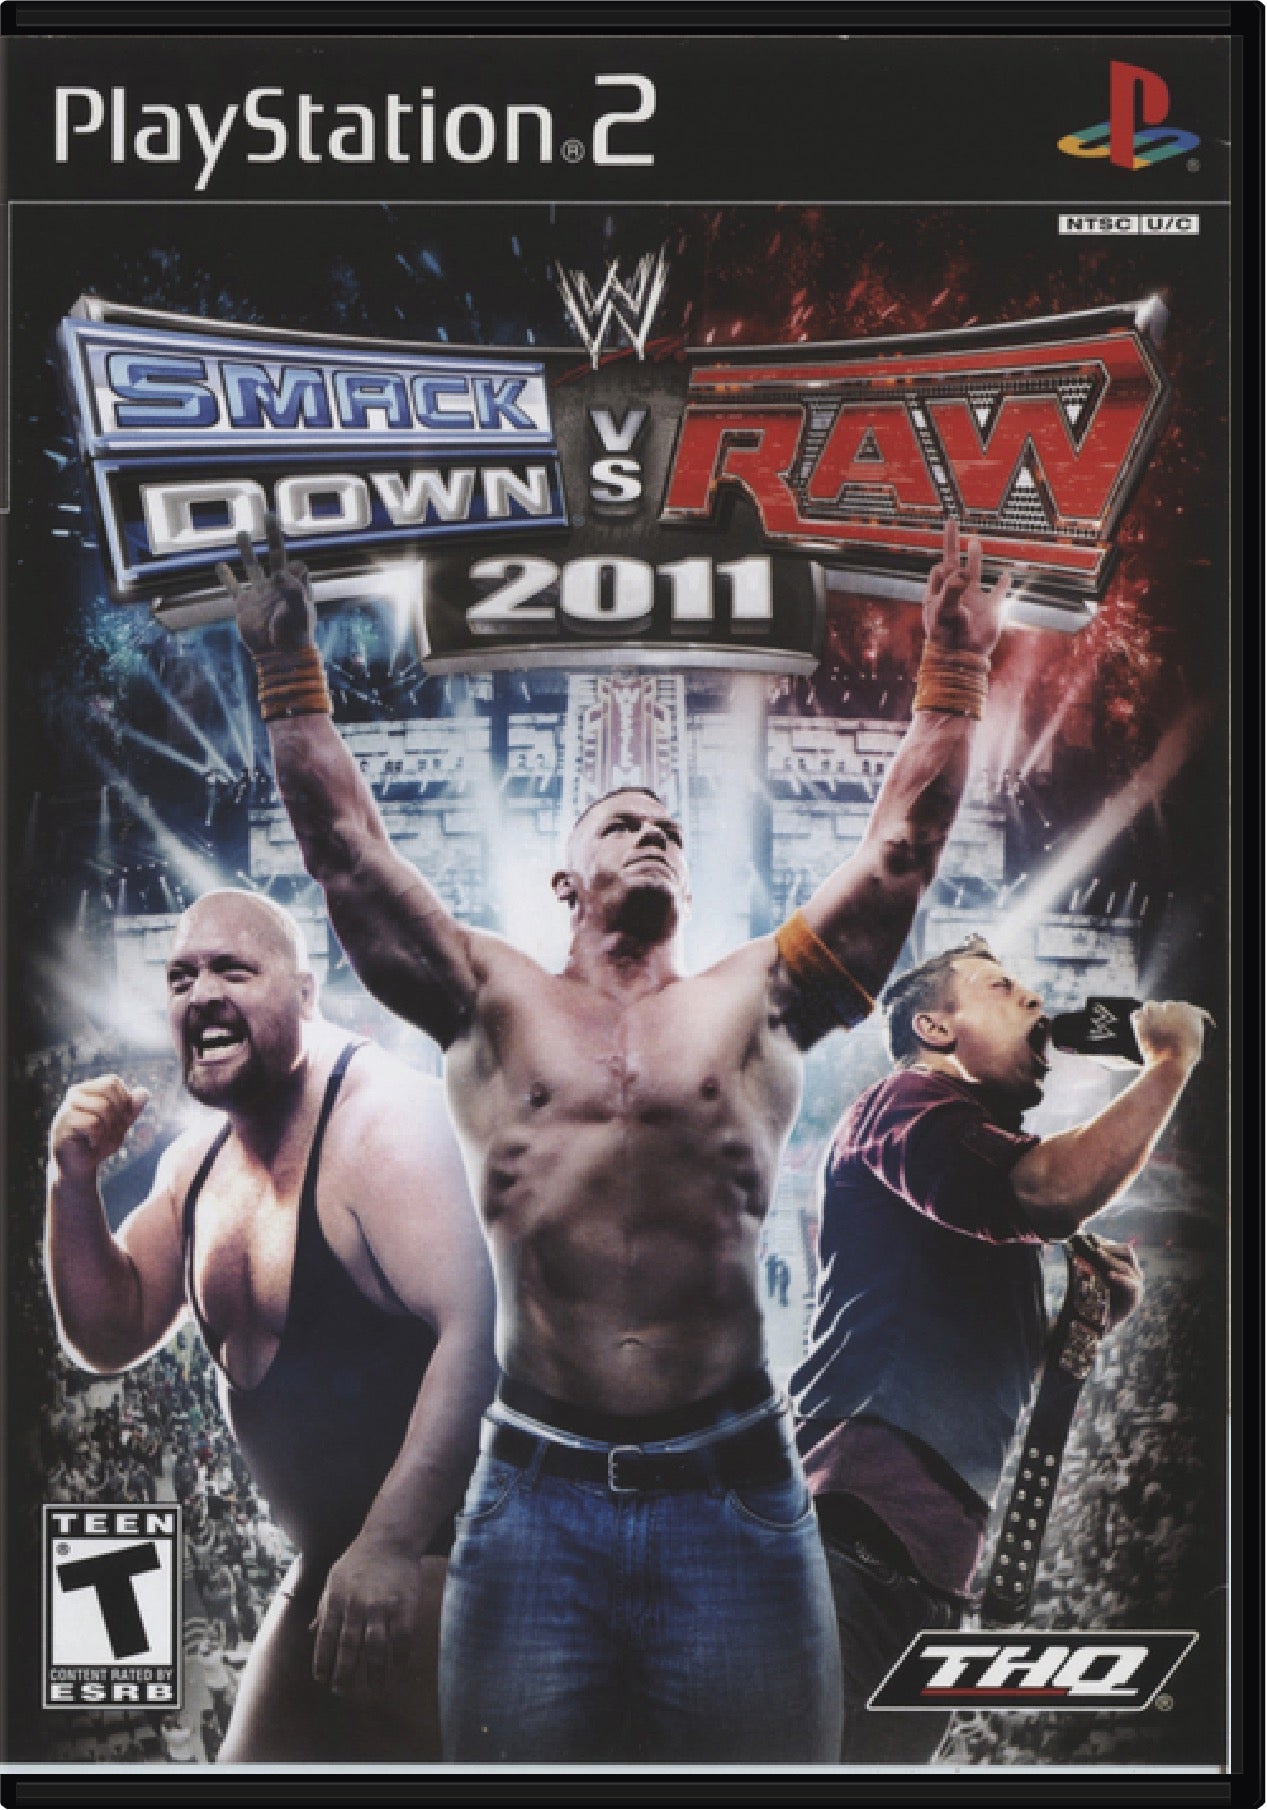 WWE Smackdown vs Raw 2011 Cover Art and Product Photo